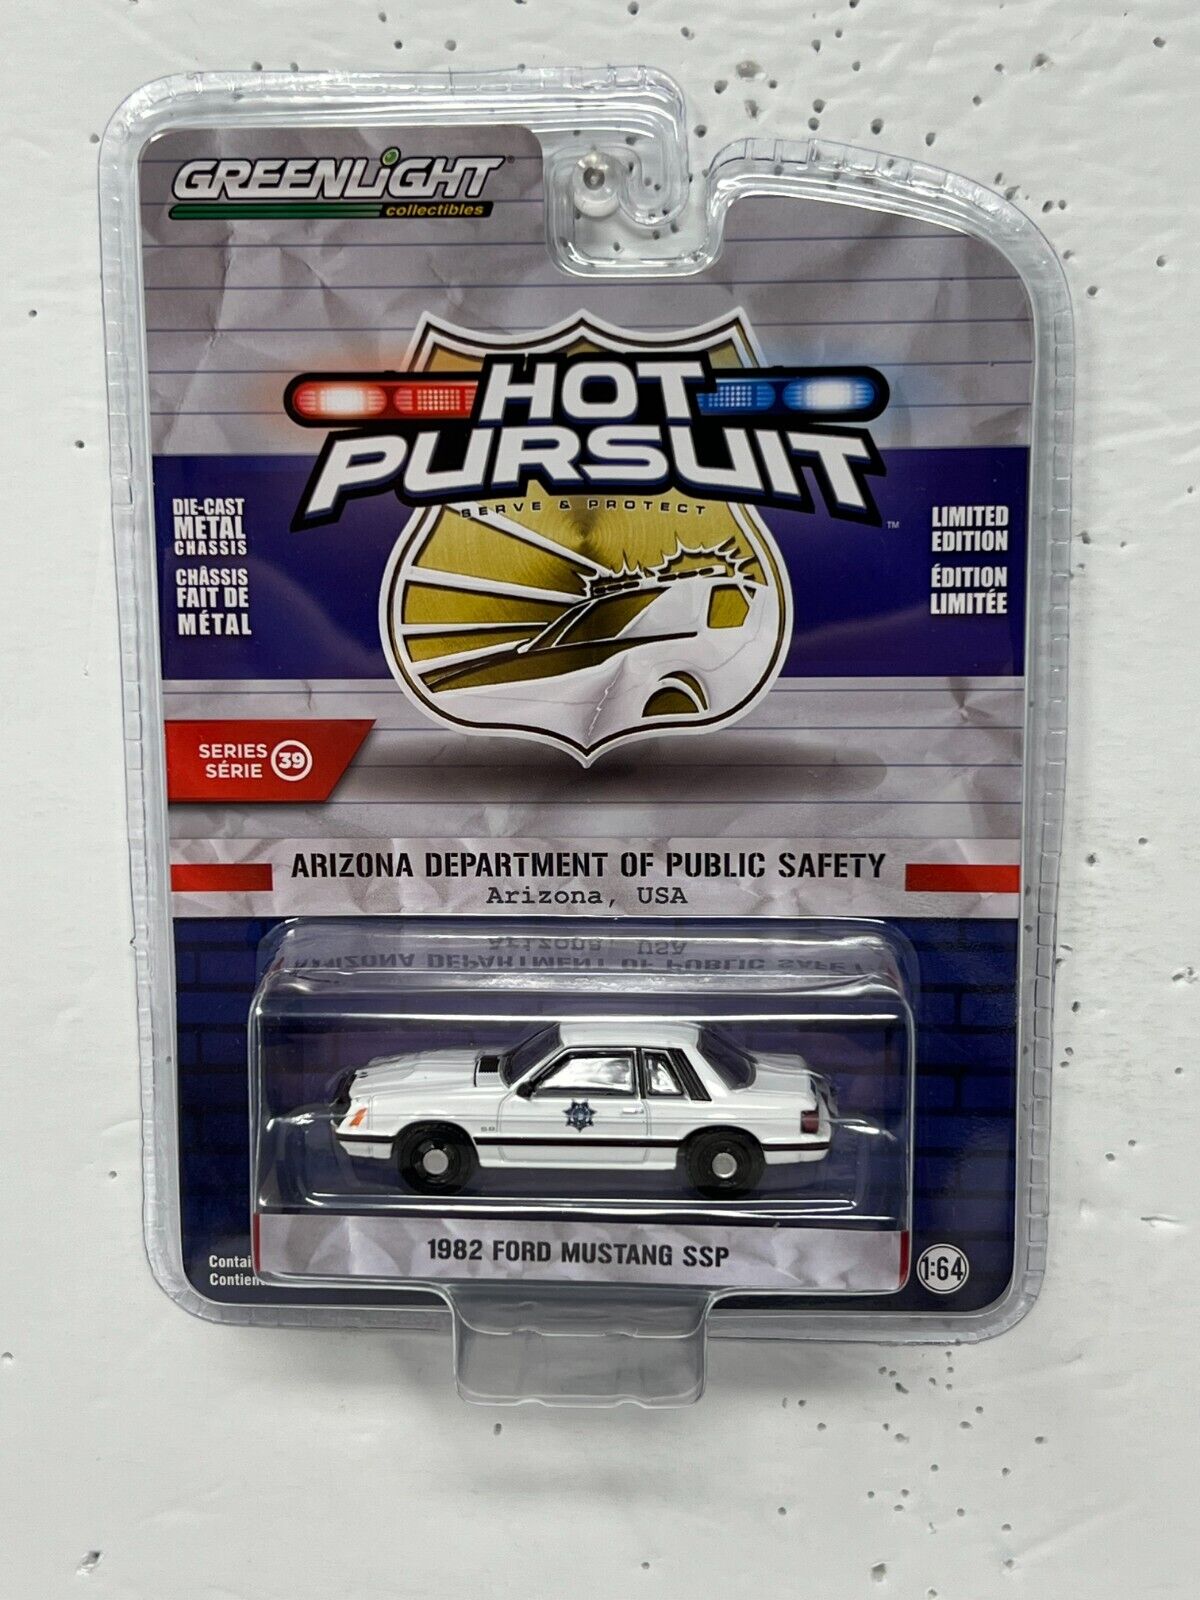 Greenlight Hot Pursuit 1982 Ford Mustang SSP 1:64 Diecast